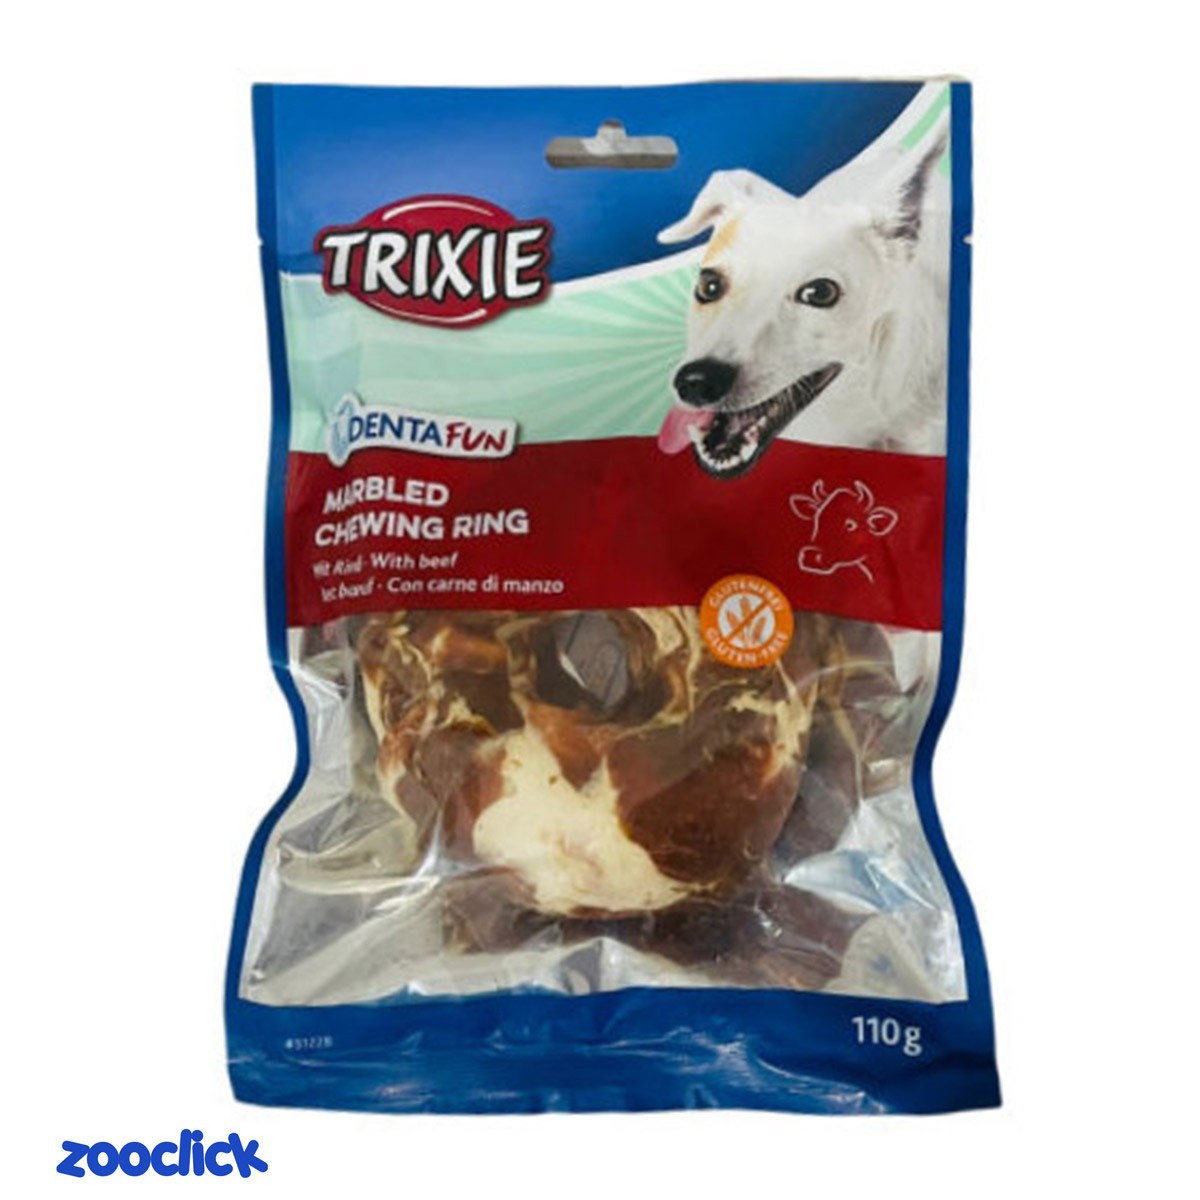 trixie beef chewing ring تشویقی جویدنی حلقه گوشت تریکسی